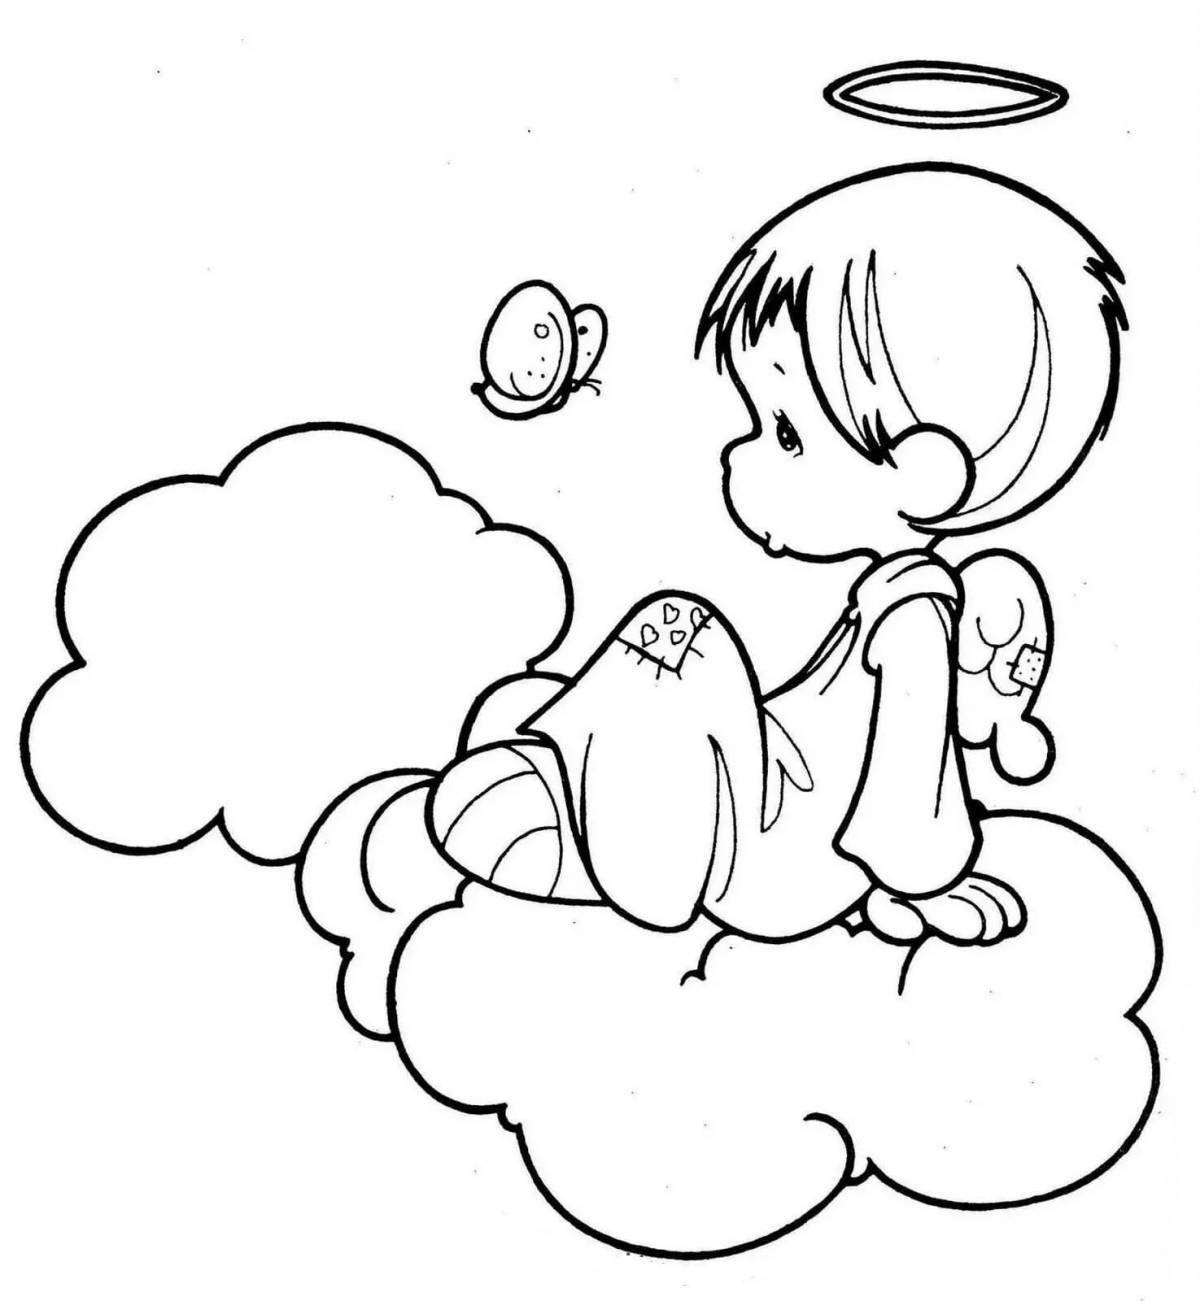 Exquisite little angel coloring book